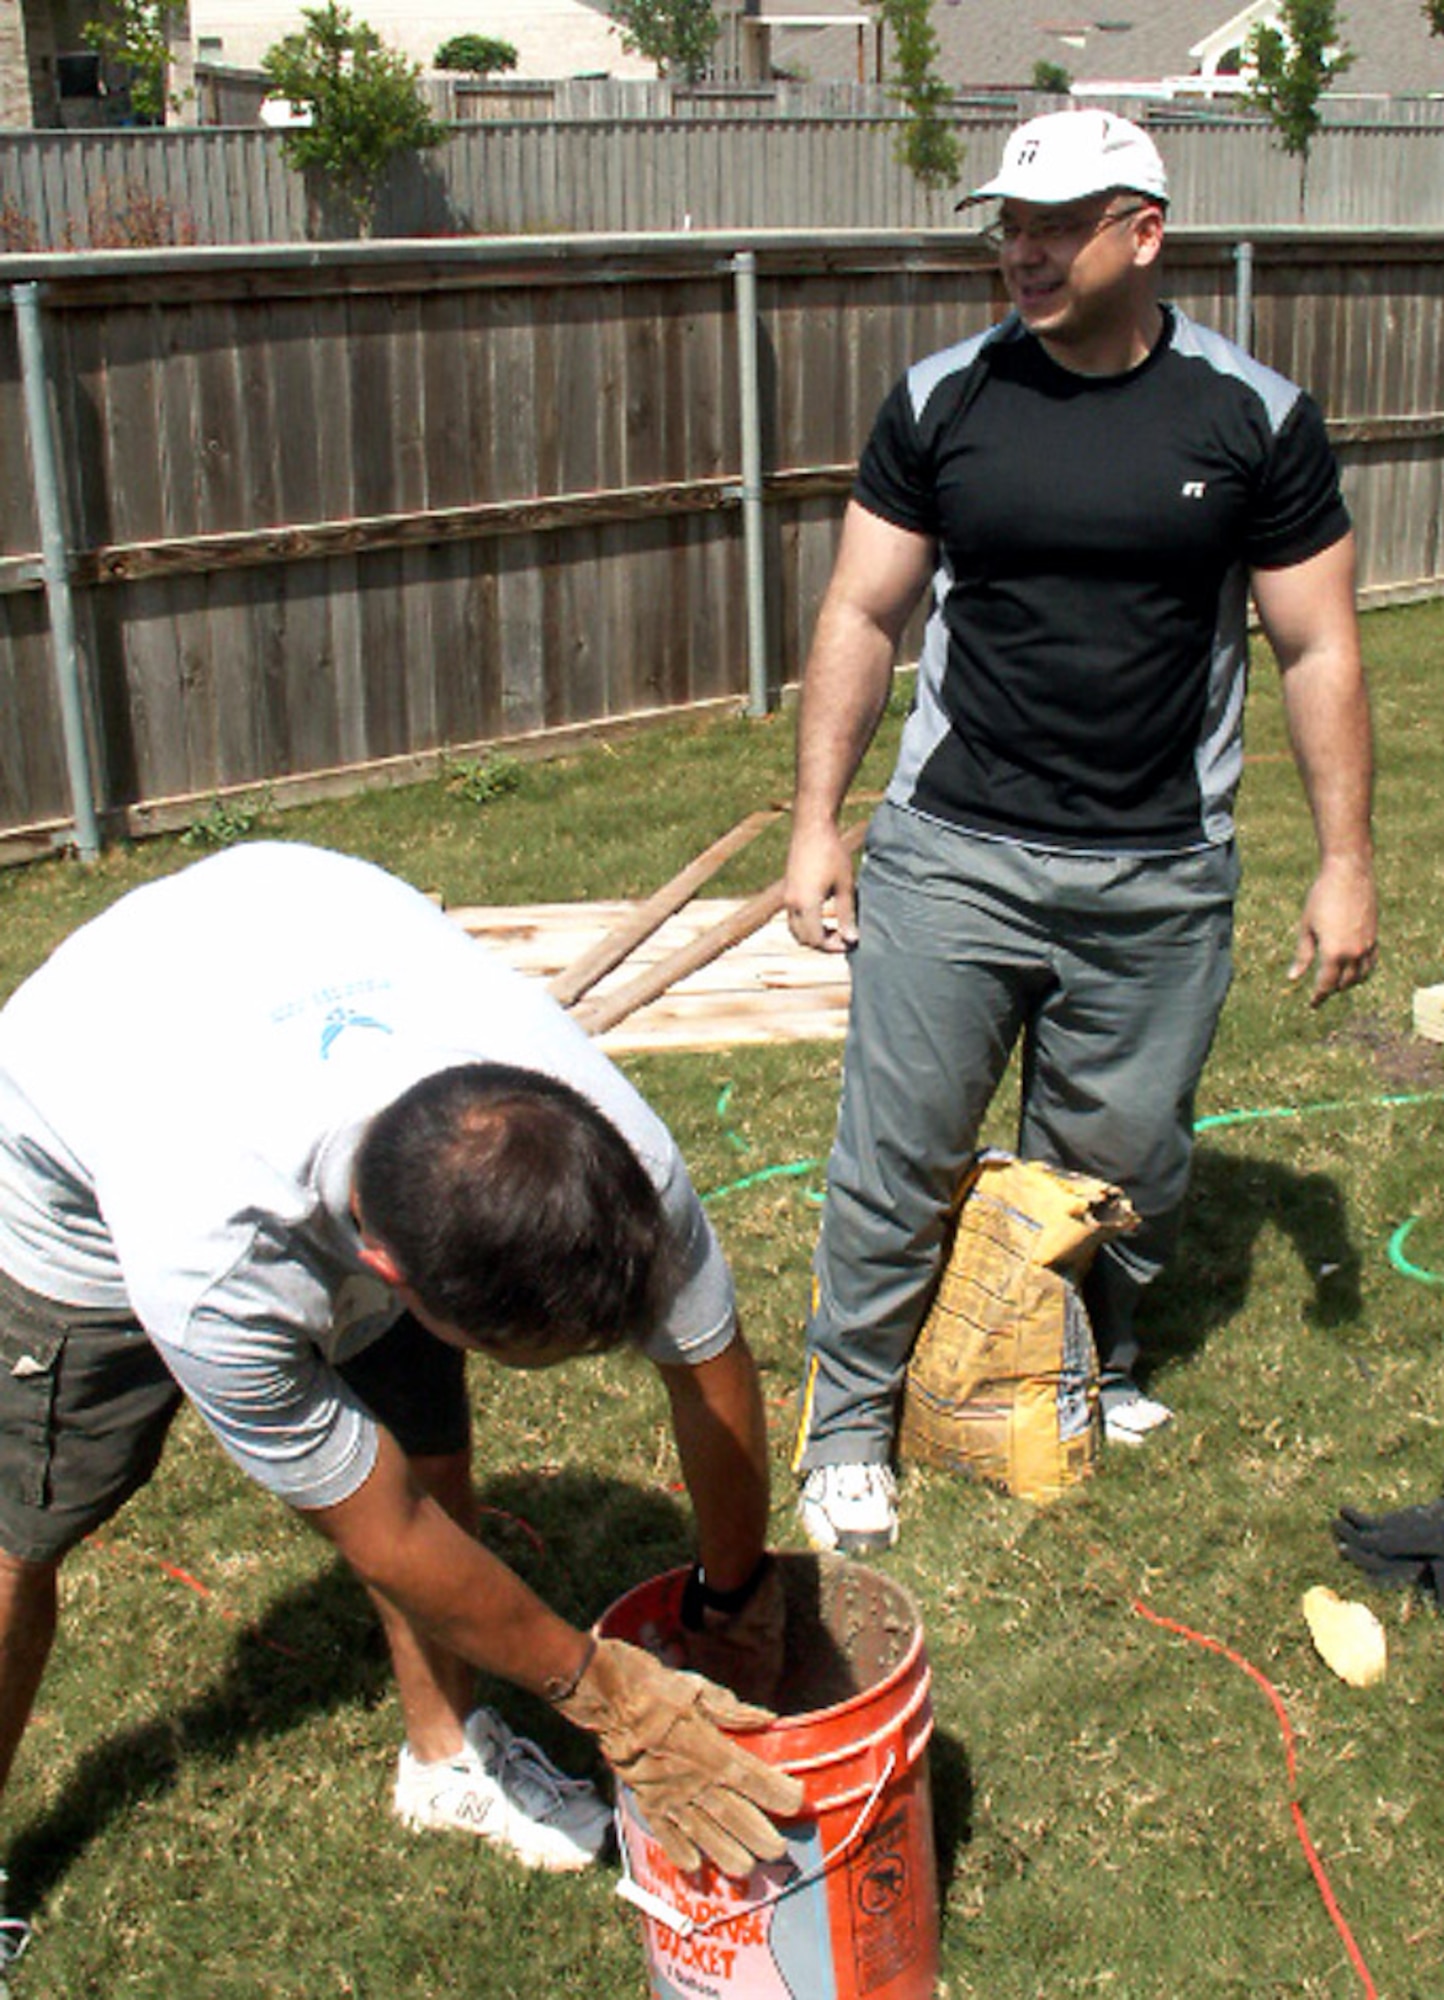 Master Sgts. Tracy Deason (left) and Angel Espinosa mix cement while participating in Operation Homefront April 30 in Cibolo, Texas. Volunteers from the Top 3 Association from Air Force Personnel Center from Randolph Air Force Base, Texas, helped craft a gate to provide better access between the front and back yards for Tech. Sgt. Israel Del Toro, an Airman recovering from wounds sustained during a roadside bombing in Afghanistan. Sergeants Deason and Espinosa are personnelists at AFPC. (U.S. Air Force photo/Master Sgt. Kat Bailey) 
